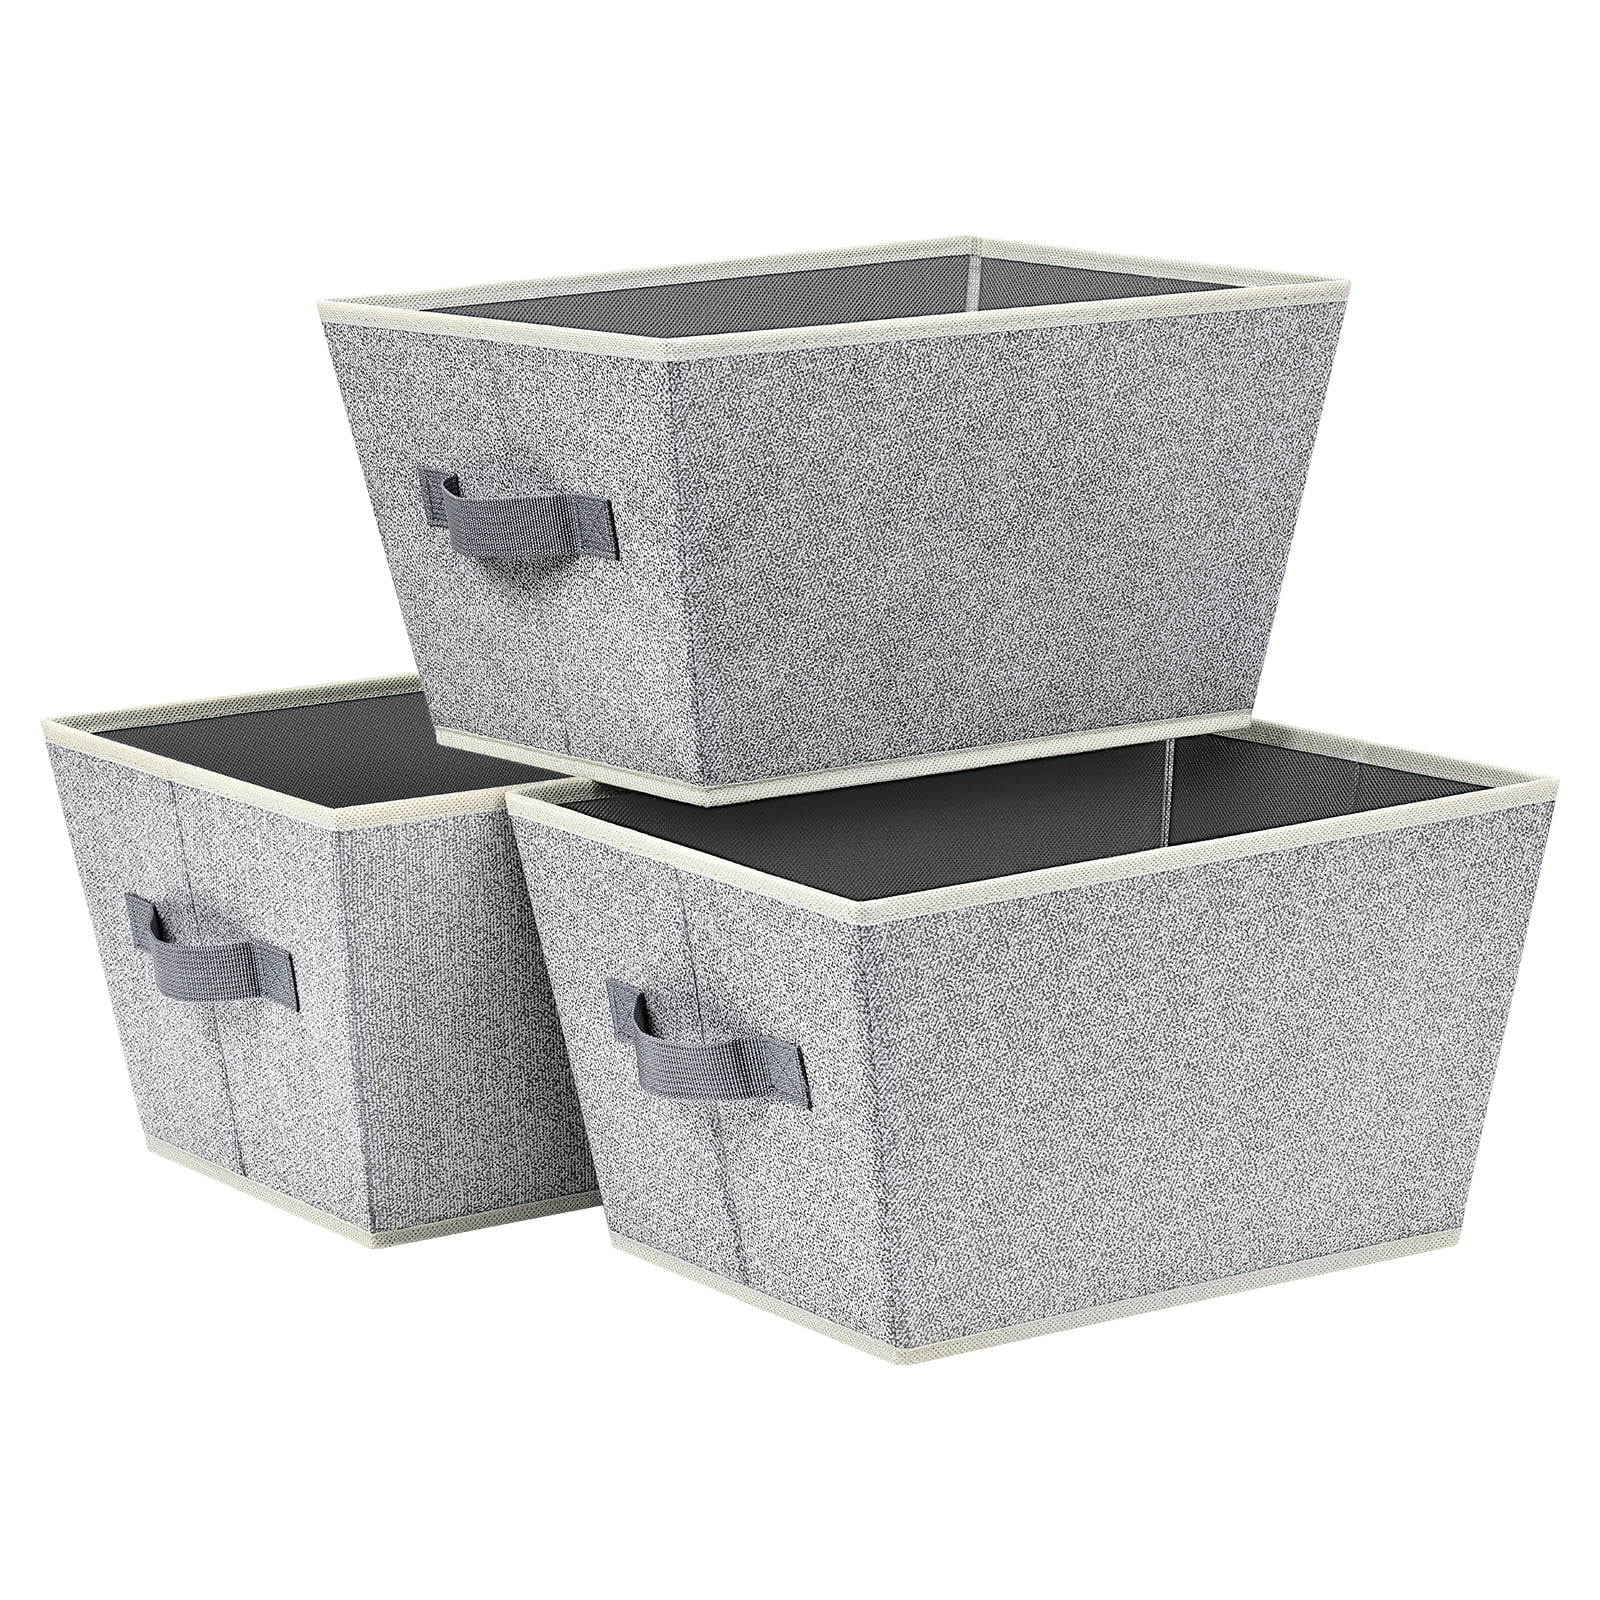  6 Pack Closet Storage Bins for Shelves, Shelf Baskets for  Organization, Closet Organizers and Storage, Trapezoid Storage Bin Closet  Shelf Organizer for Clothes,Toy,Towel,Book,Baby Clothing (6PC-Gray) : Home  & Kitchen